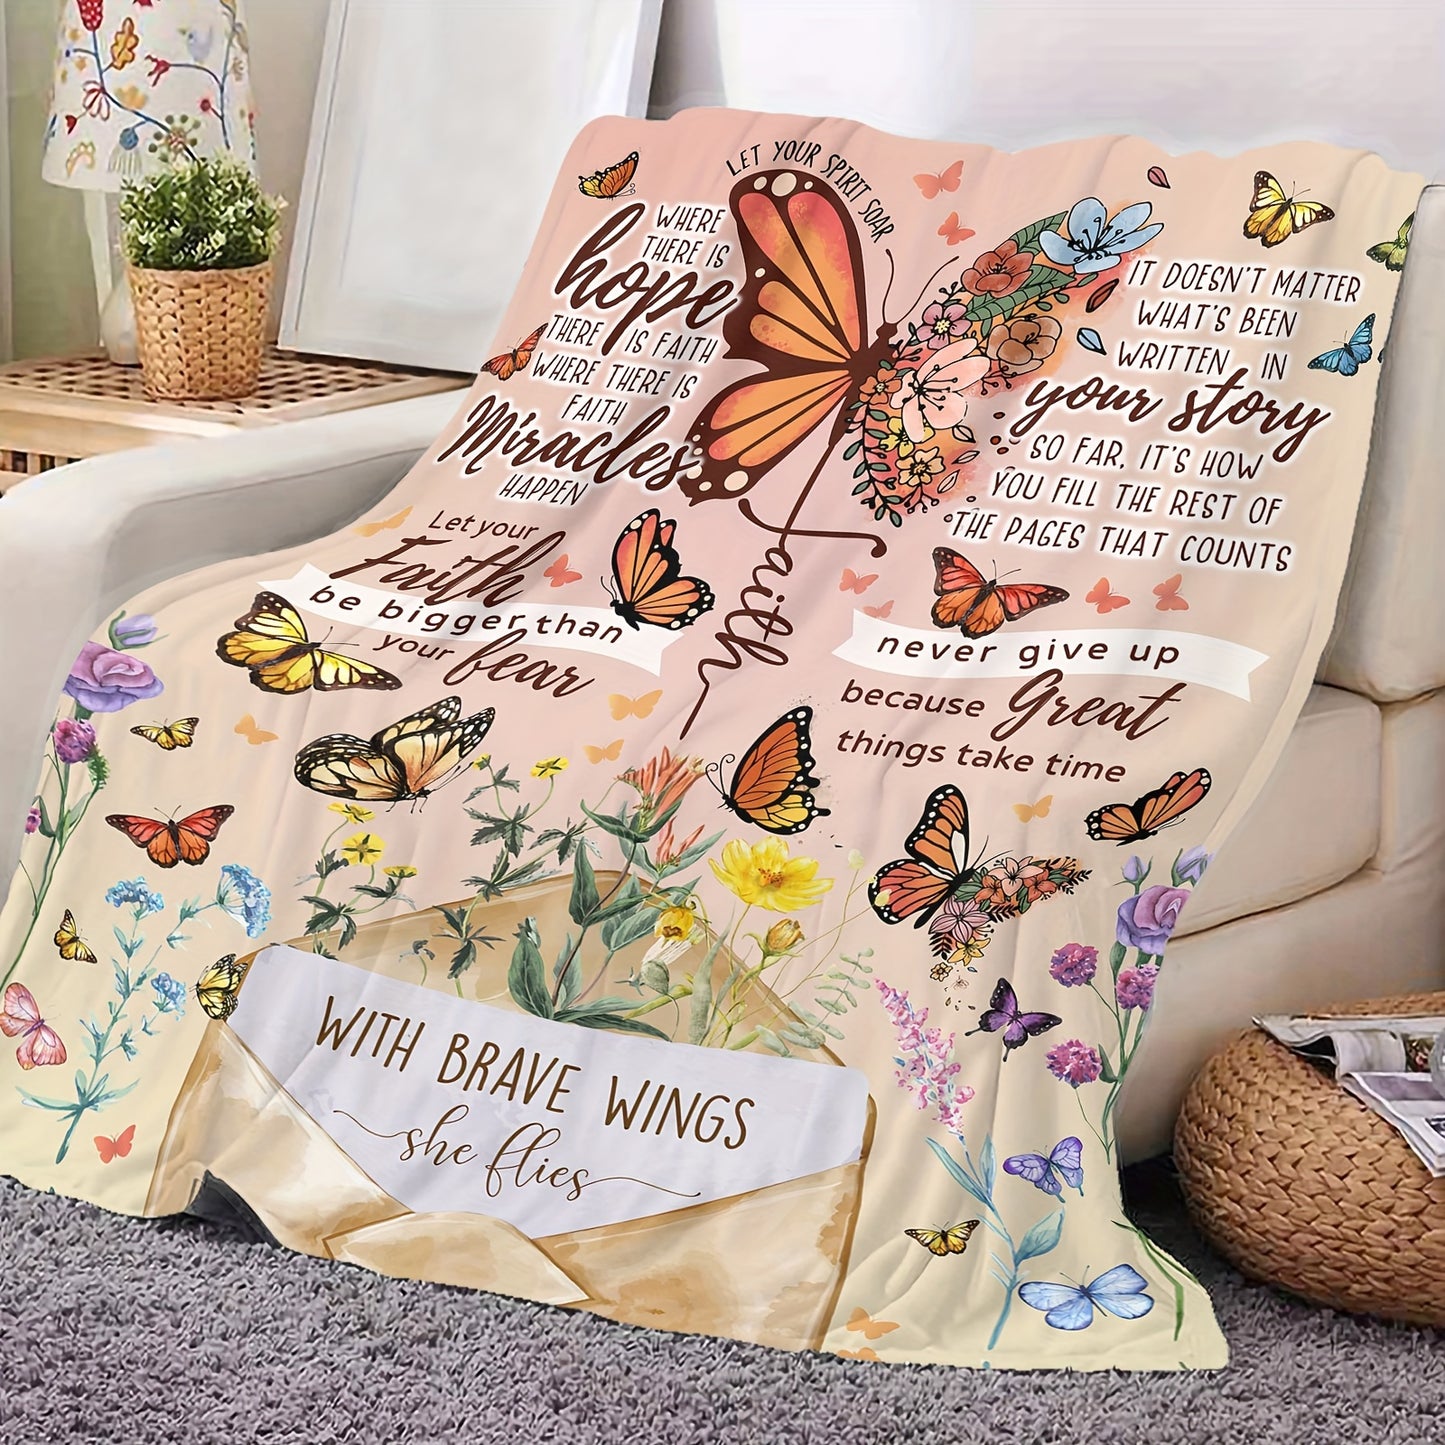 With Brave Wings She Flies Christian Flannel Blanket claimedbygoddesigns